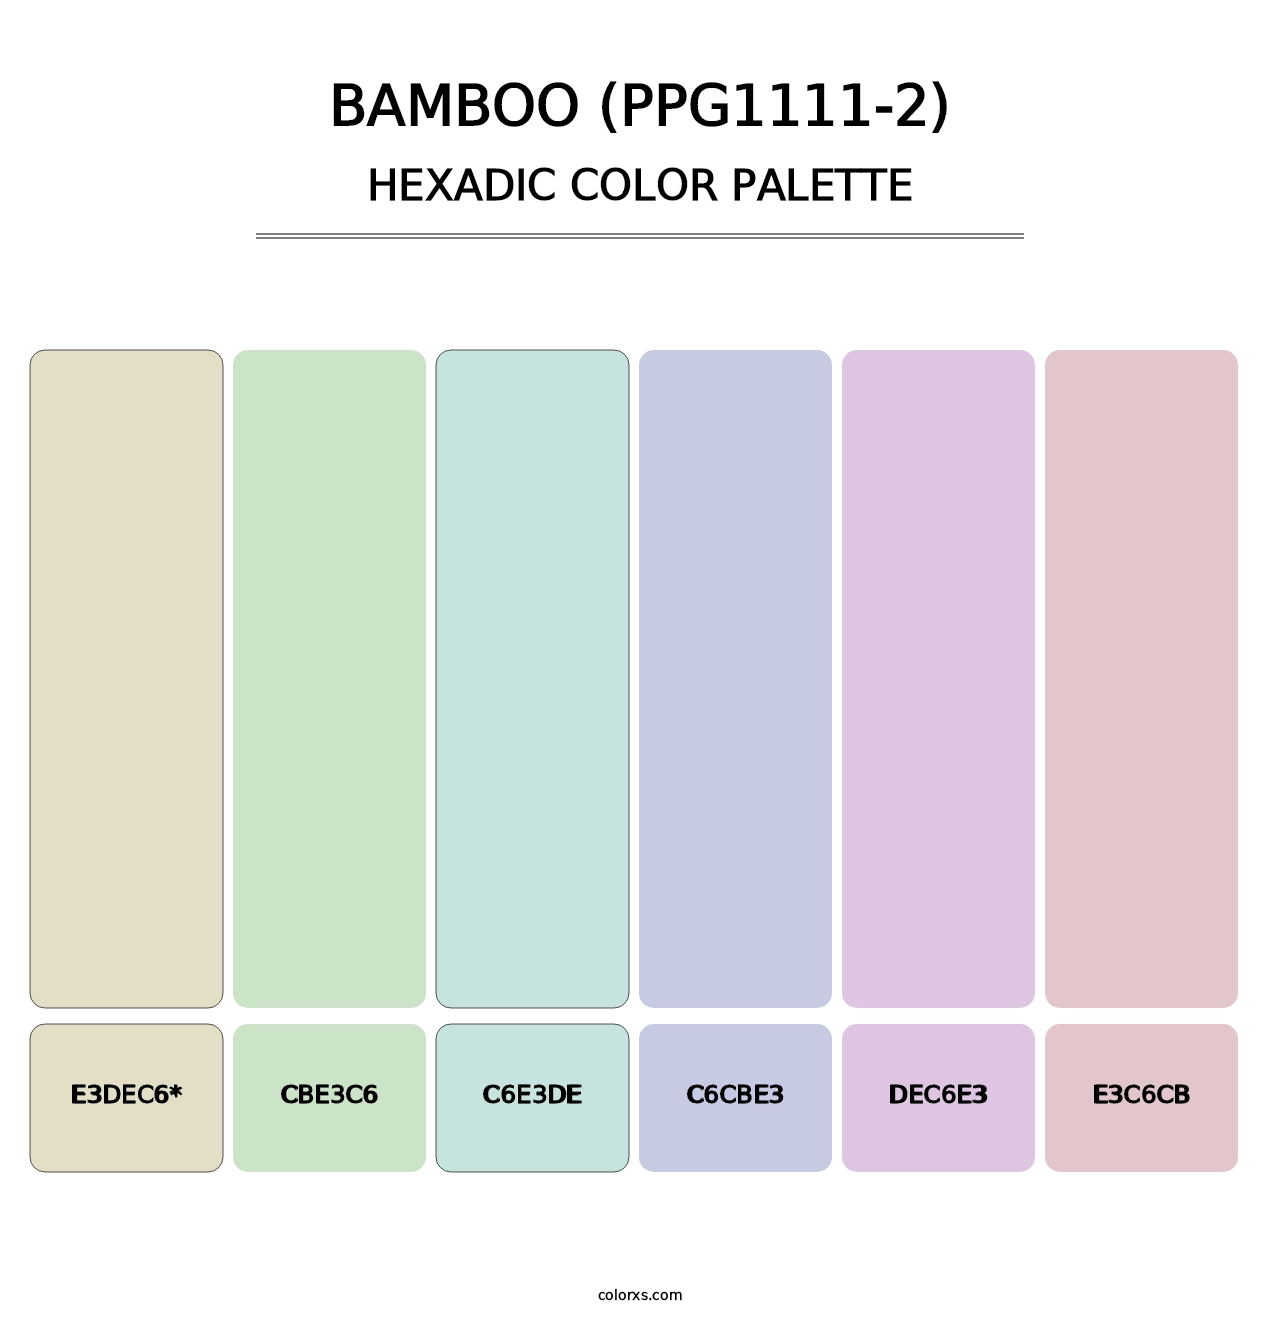 Bamboo (PPG1111-2) - Hexadic Color Palette